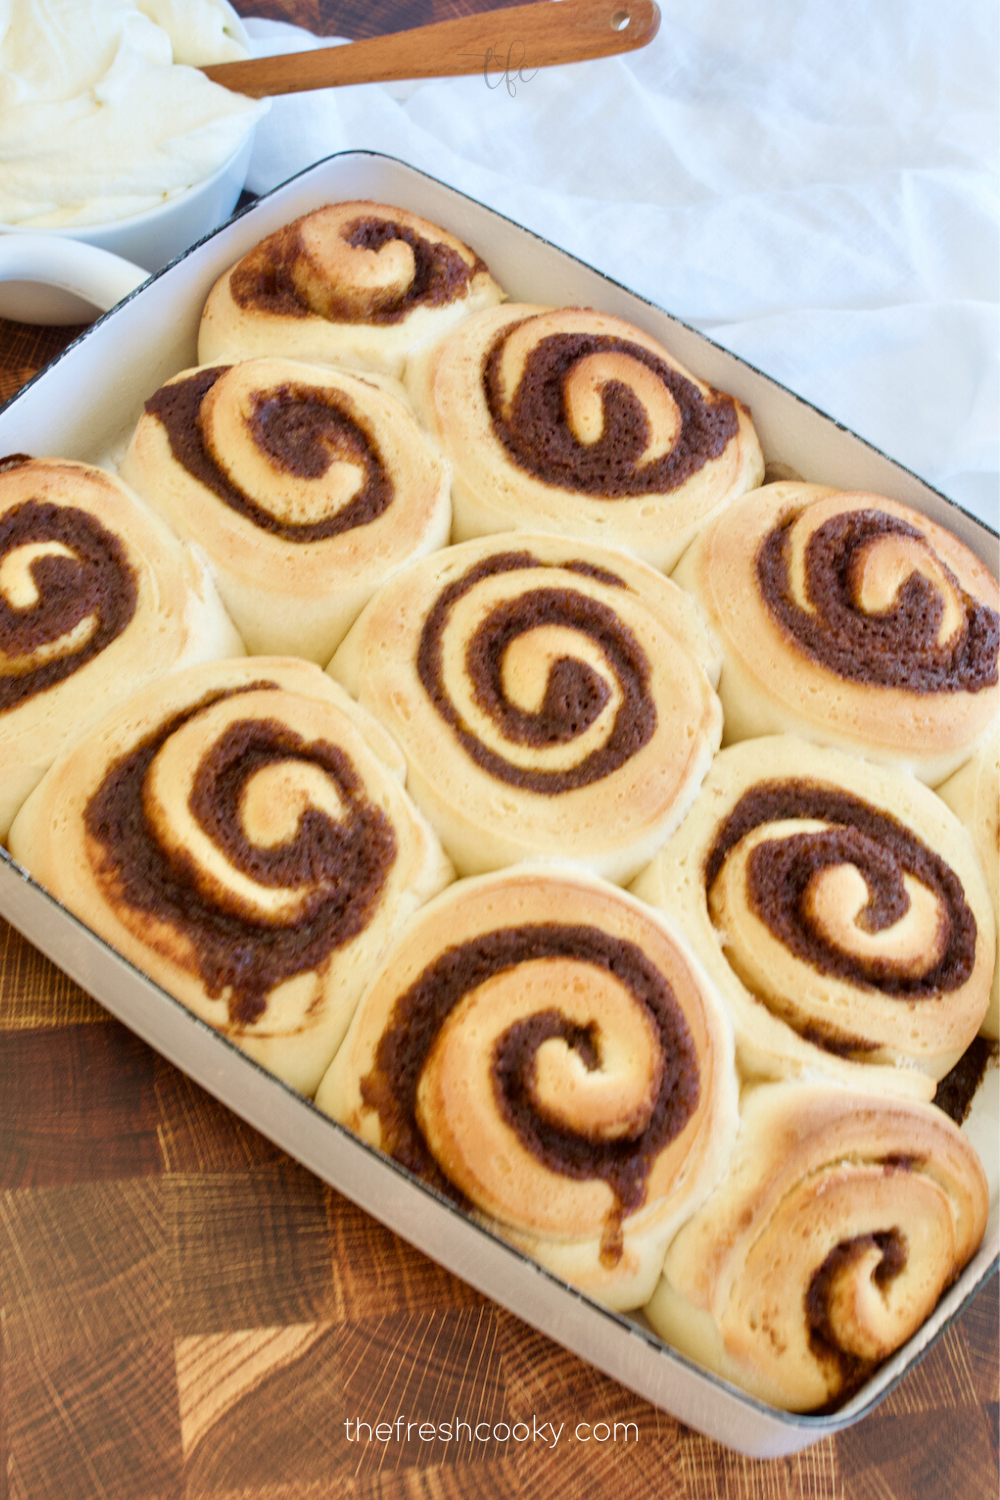 Pan of baked cinnamon rolls hot out of the oven with frosting nearby.